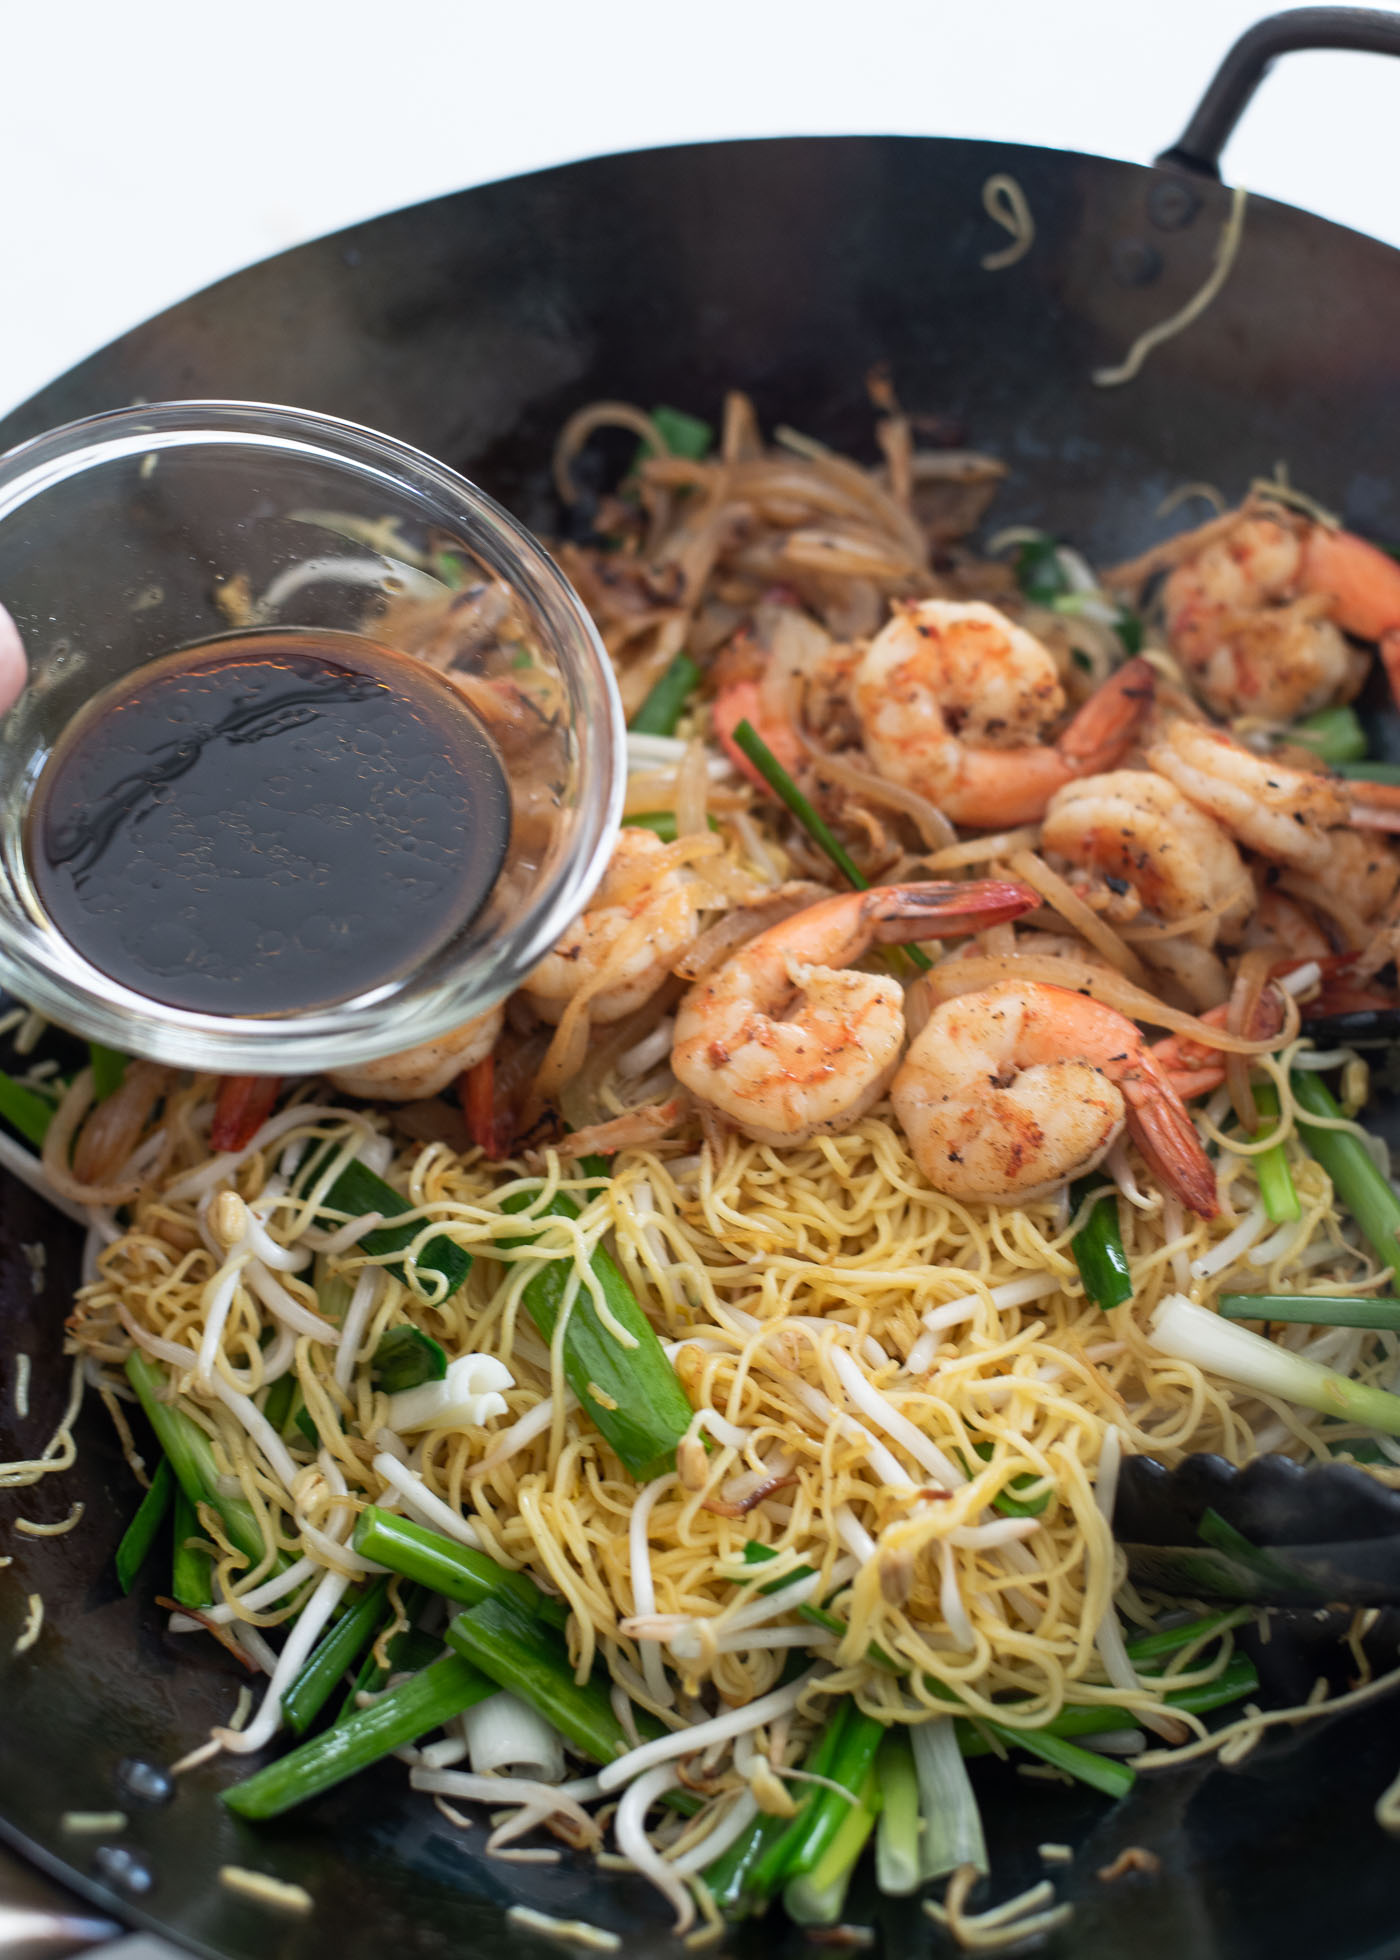 A small bowl of sauce is being poured on the noodles, shrimp and vegetables in a wok.